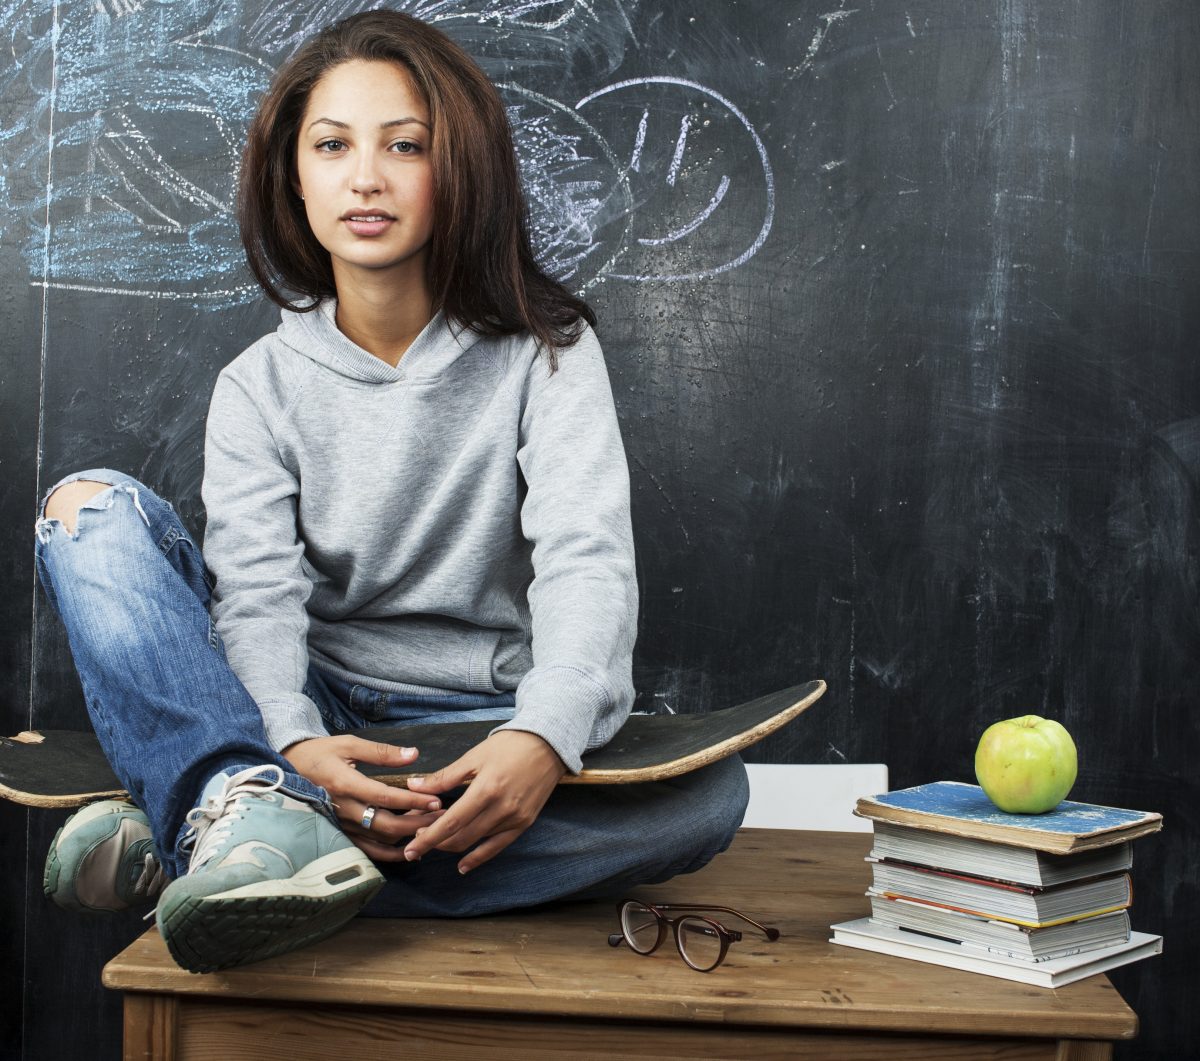 A young woman sitting on a desk with an apple and a skateboard in front of a chalkboard.